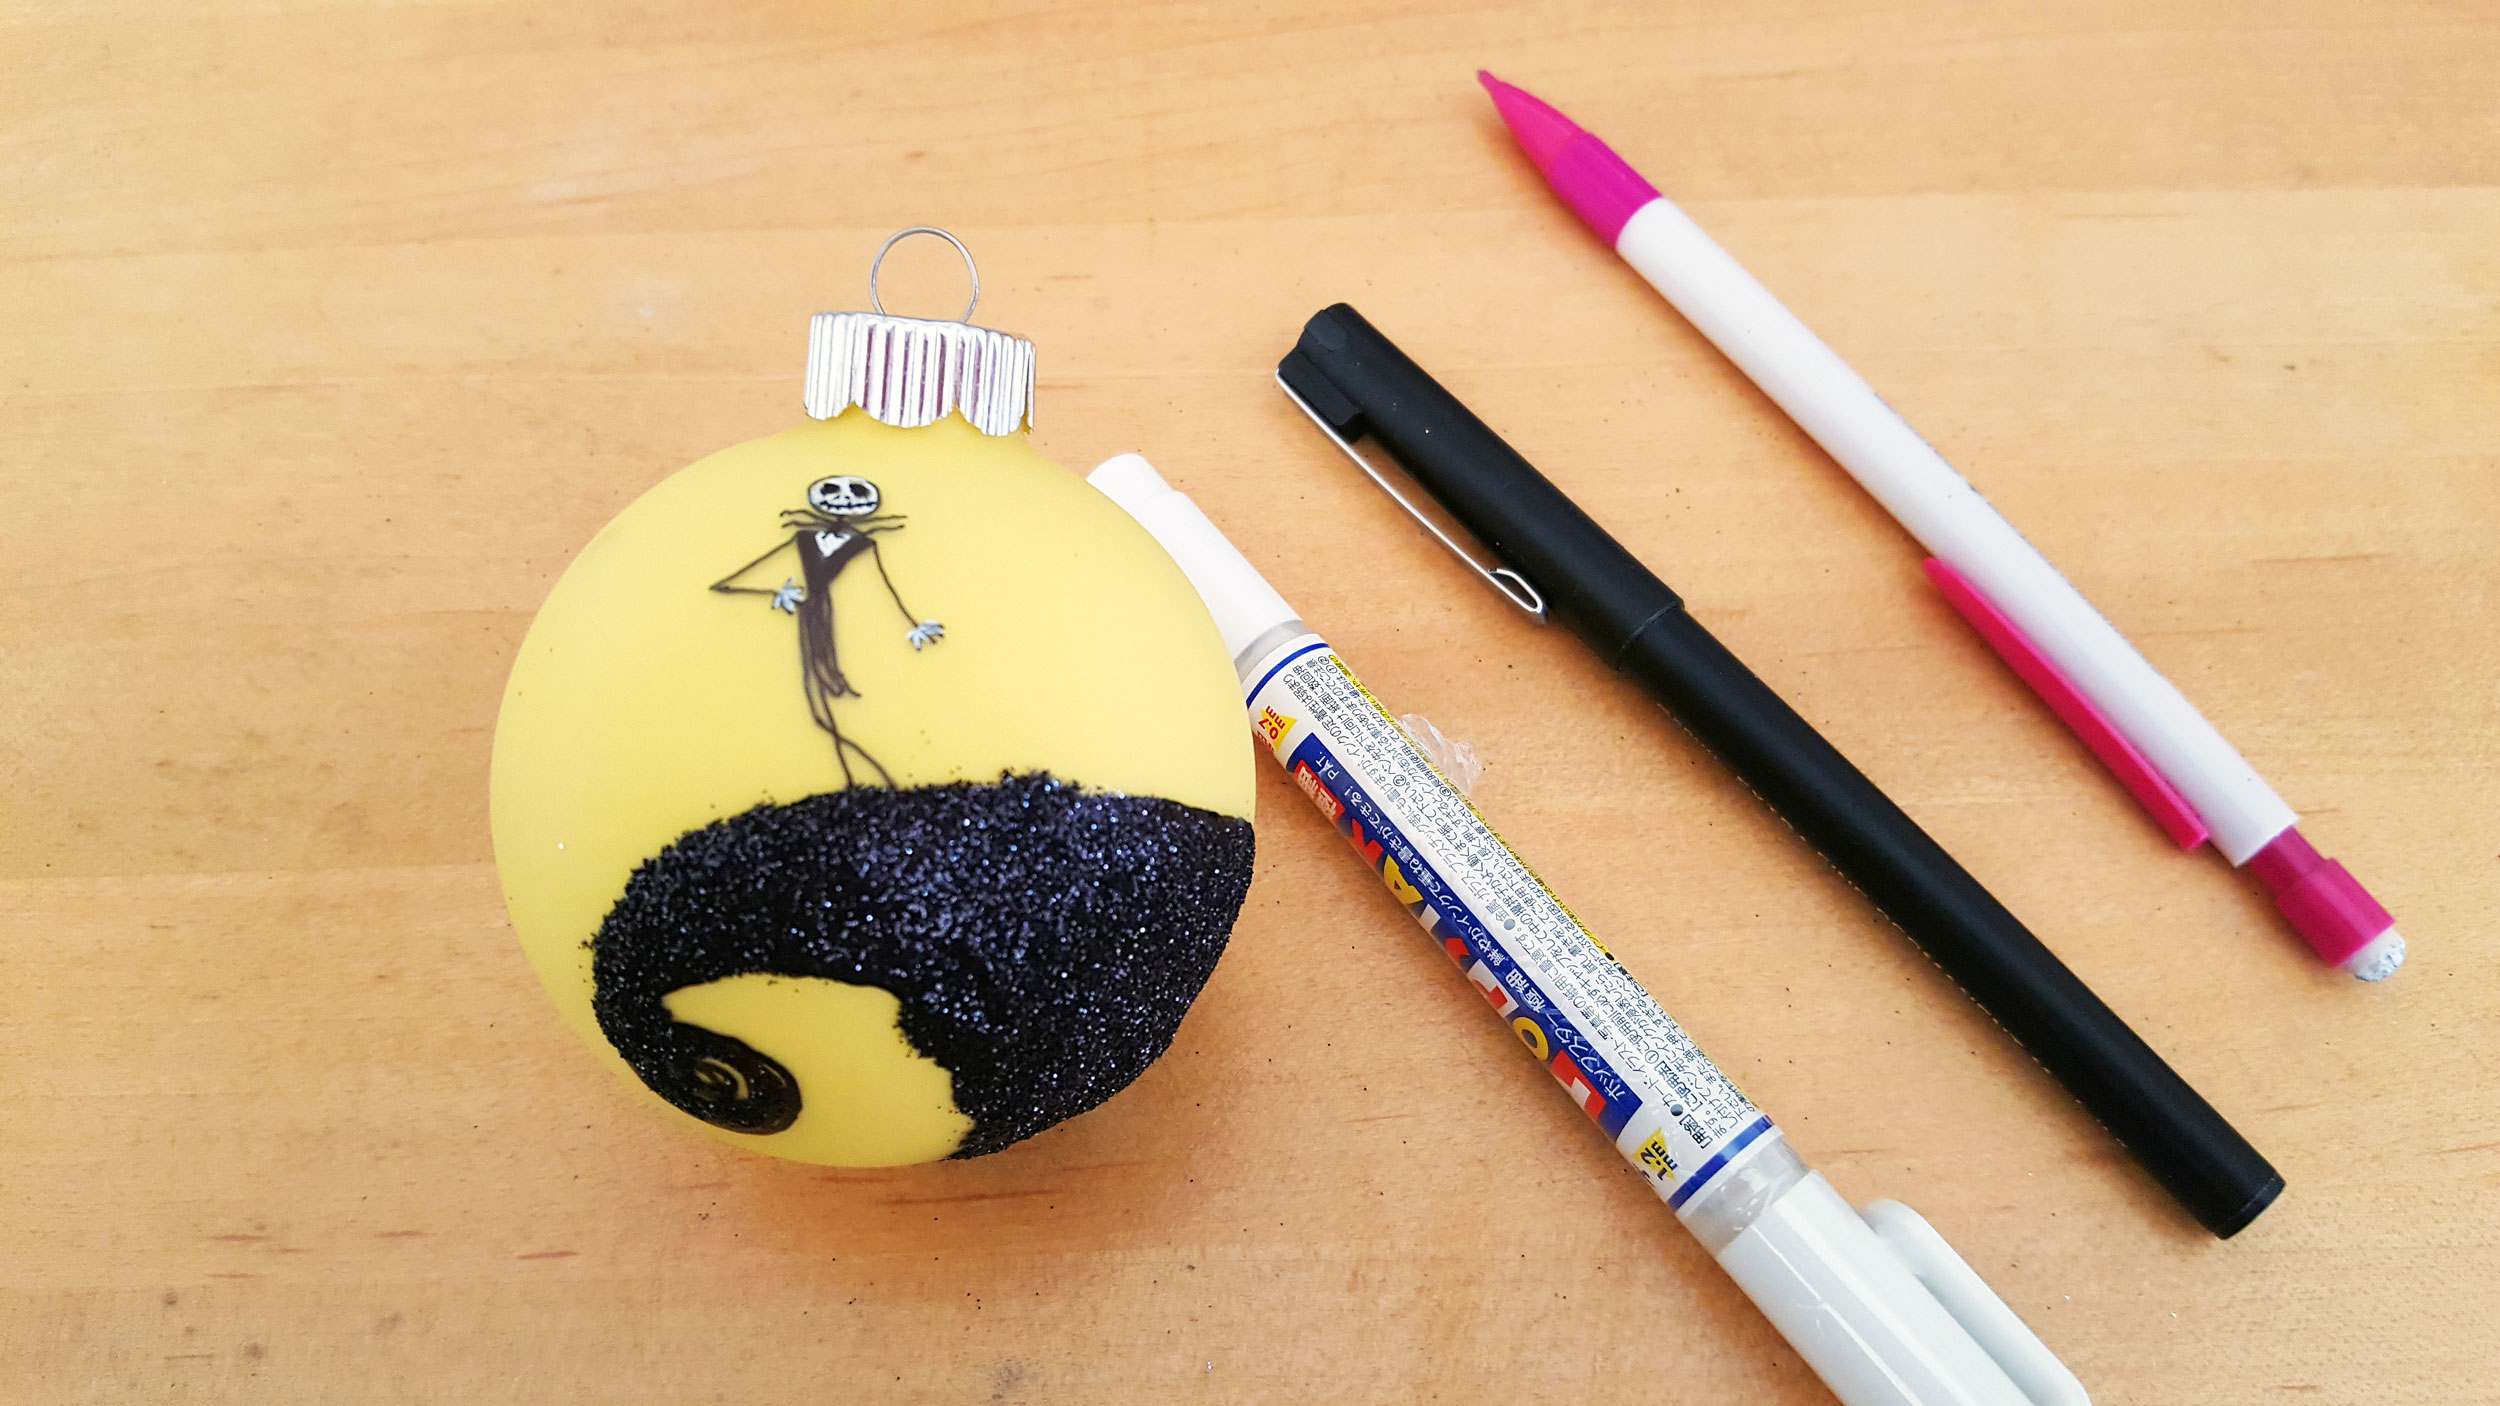 Nightmare Before Christmas Ornaments use markers to draw Jack Skellington standing on the ledge | OrnamentShop.com